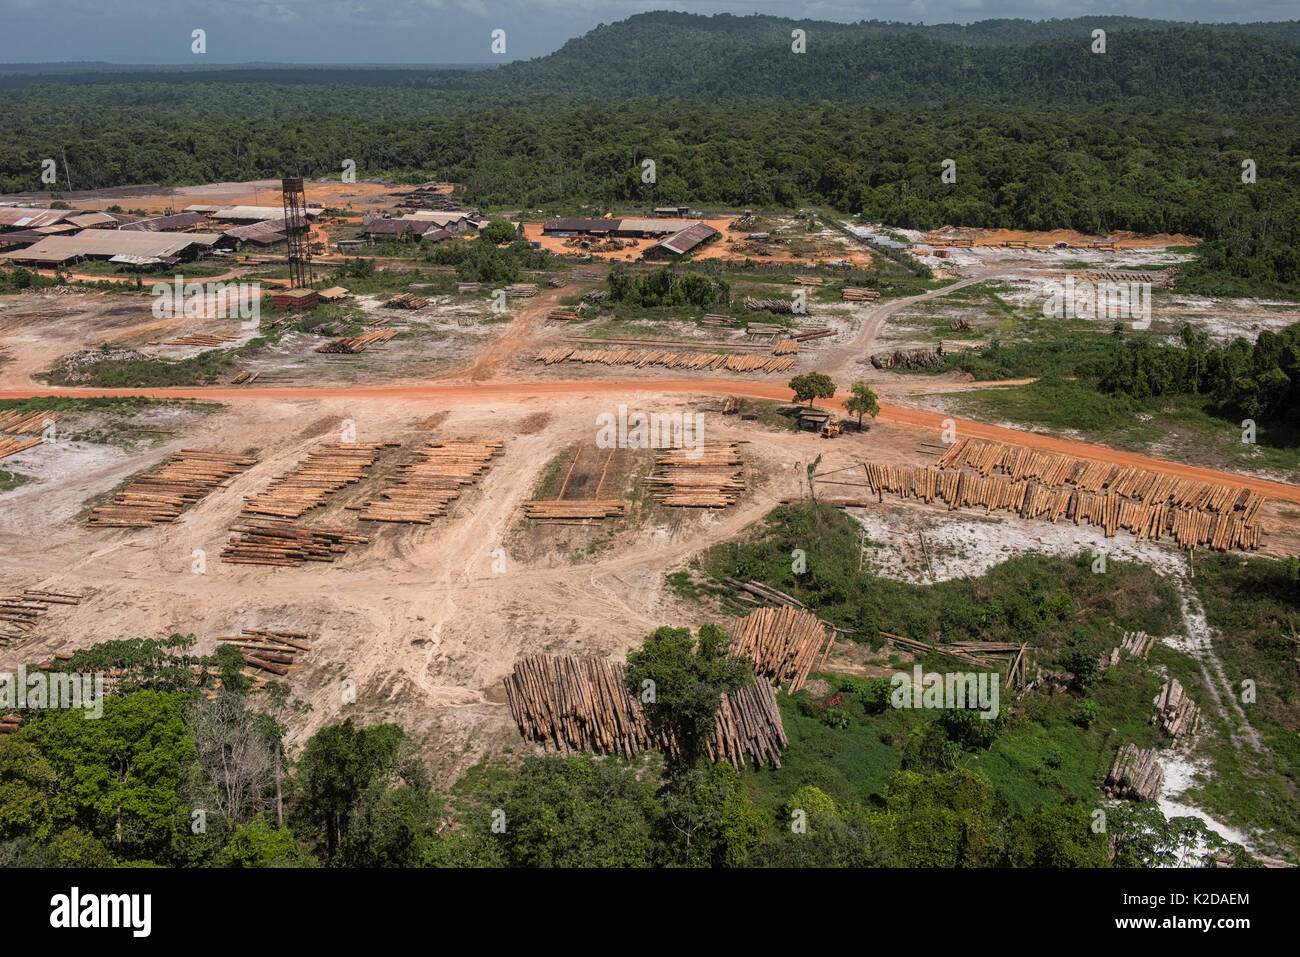 Aerial view of Logging camp in the middle of rainforest, Rupununi, Guyana, South America Stock Photo